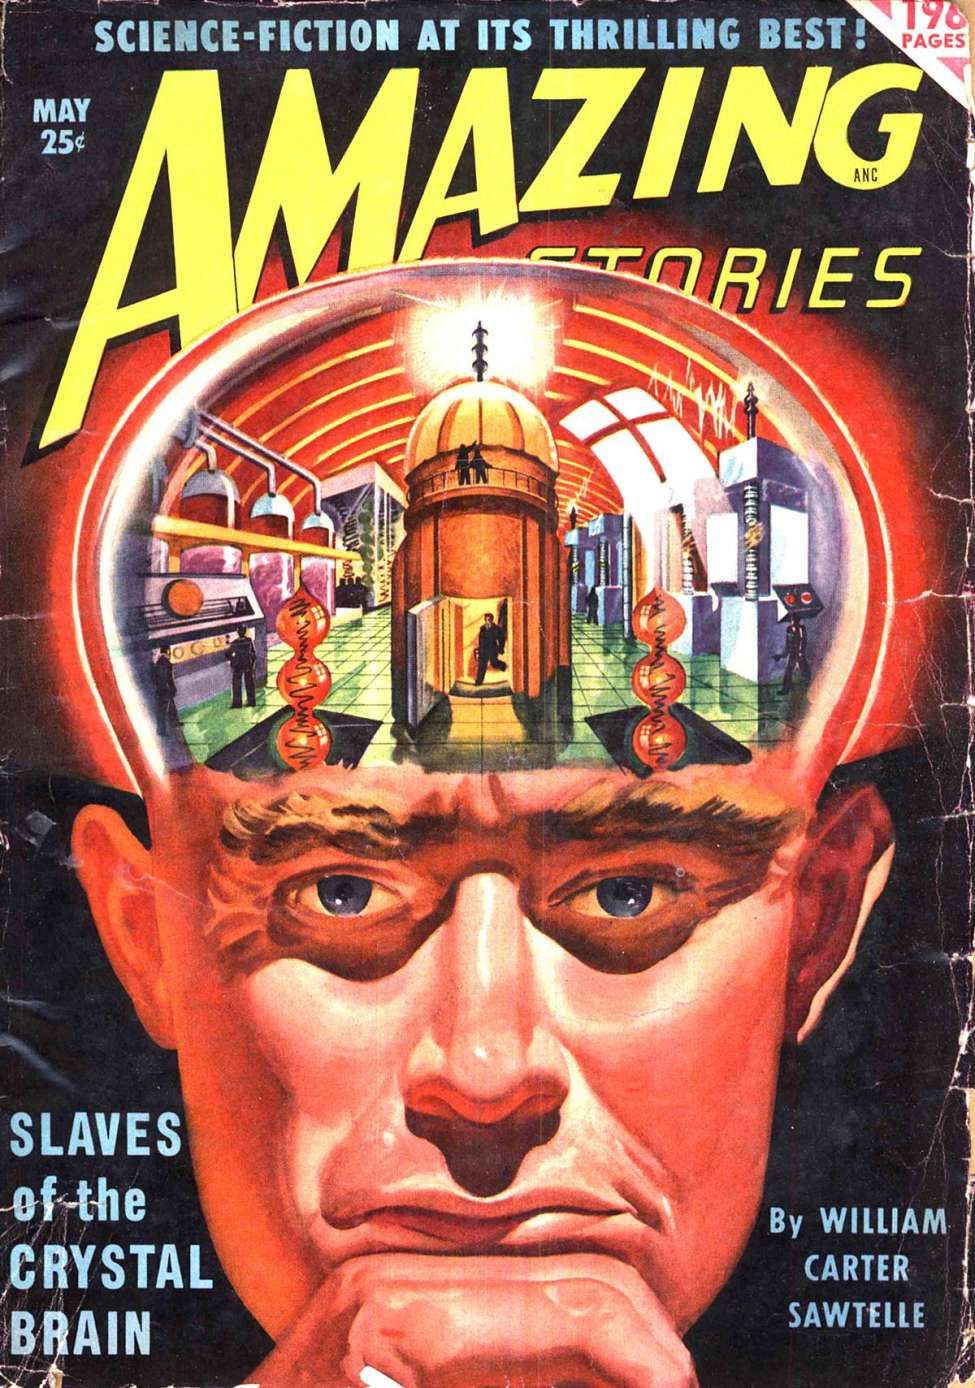 Comic Book Cover For Amazing Stories v24 5 - Slaves of the Crystal Brain - William Carter Sawtelle